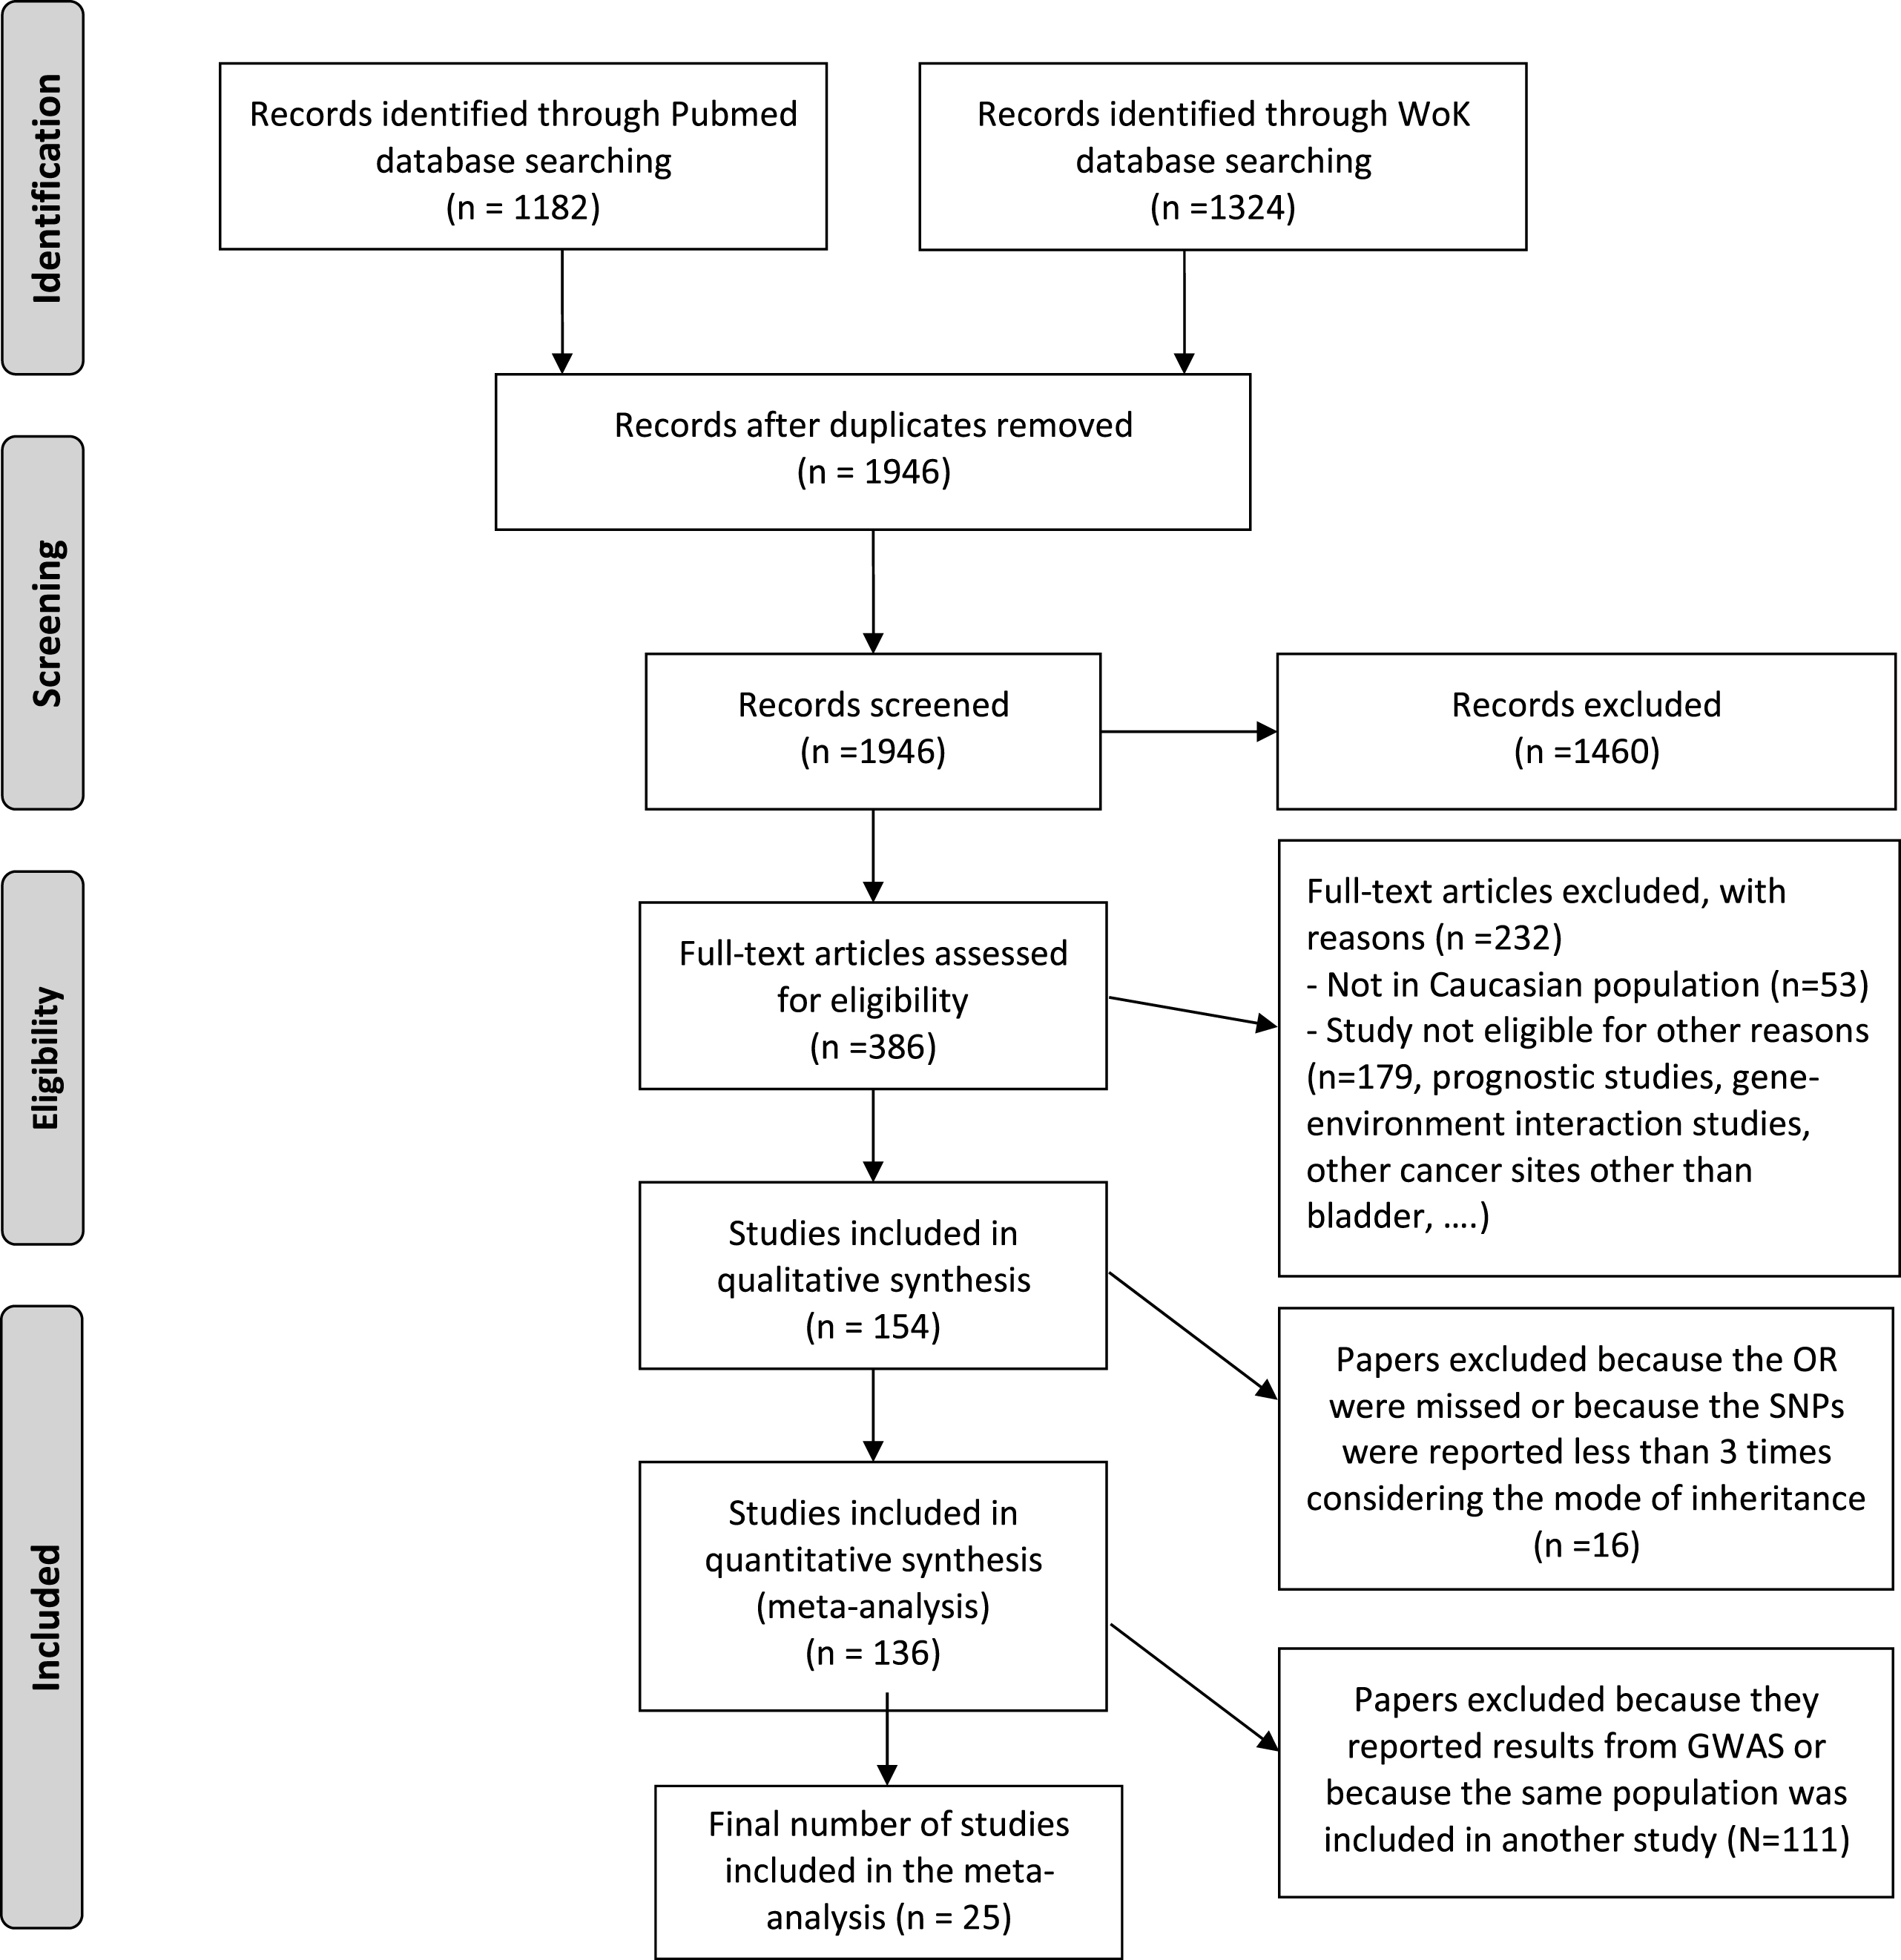 PRISMA 2009 Flow Diagram detailing the article selection steps to guide the systematic review and metaanalysis on genetic variants associated with bladder cancer based on a candidate approach.